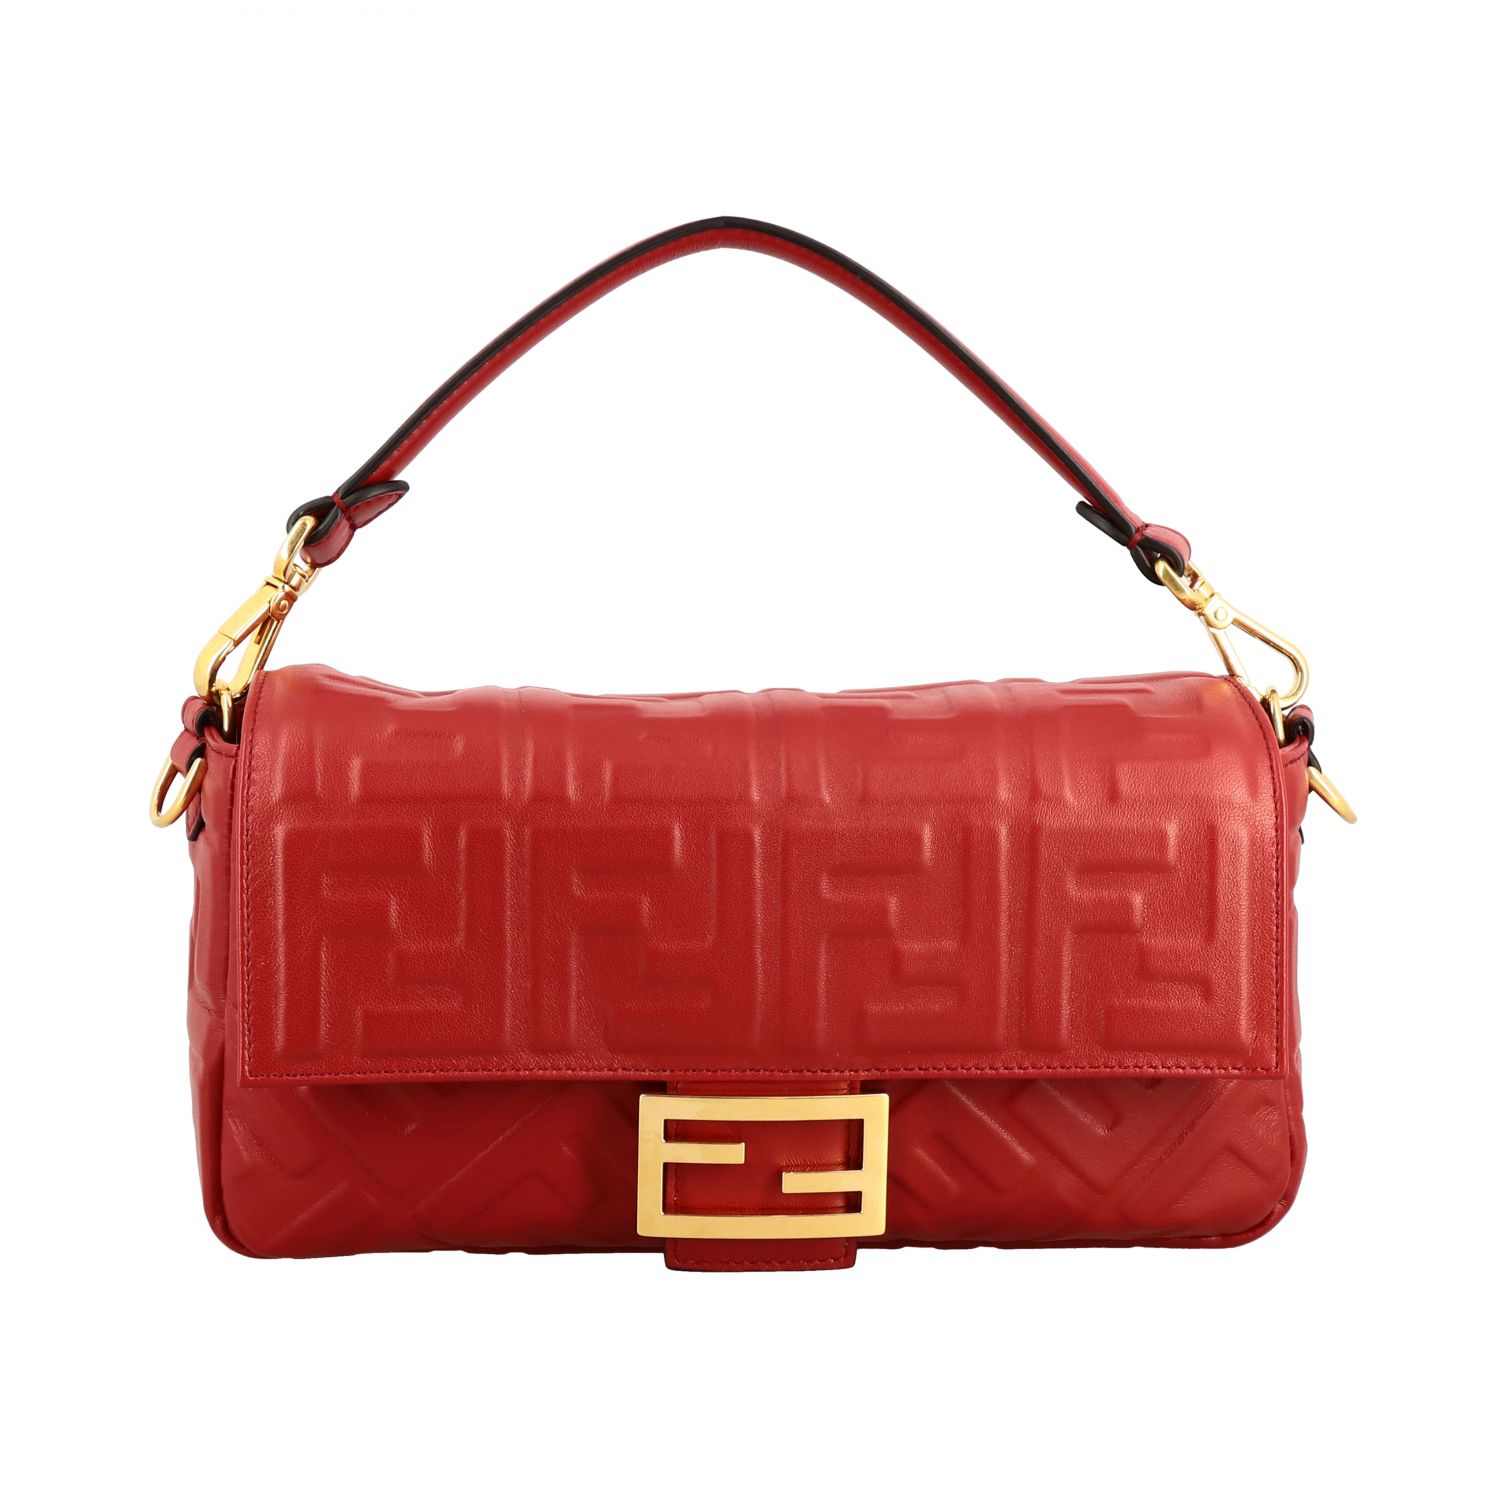 FENDI: Baguette bag in leather with embossed logo - Red | Fendi ...